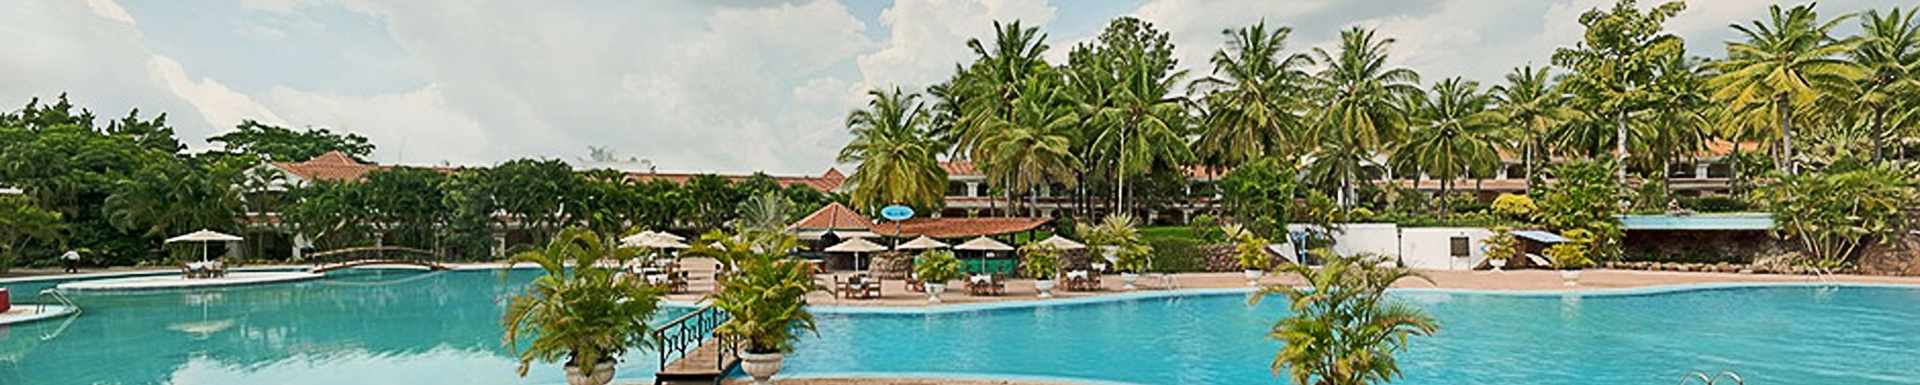 Golden Palms Hotel and Spa